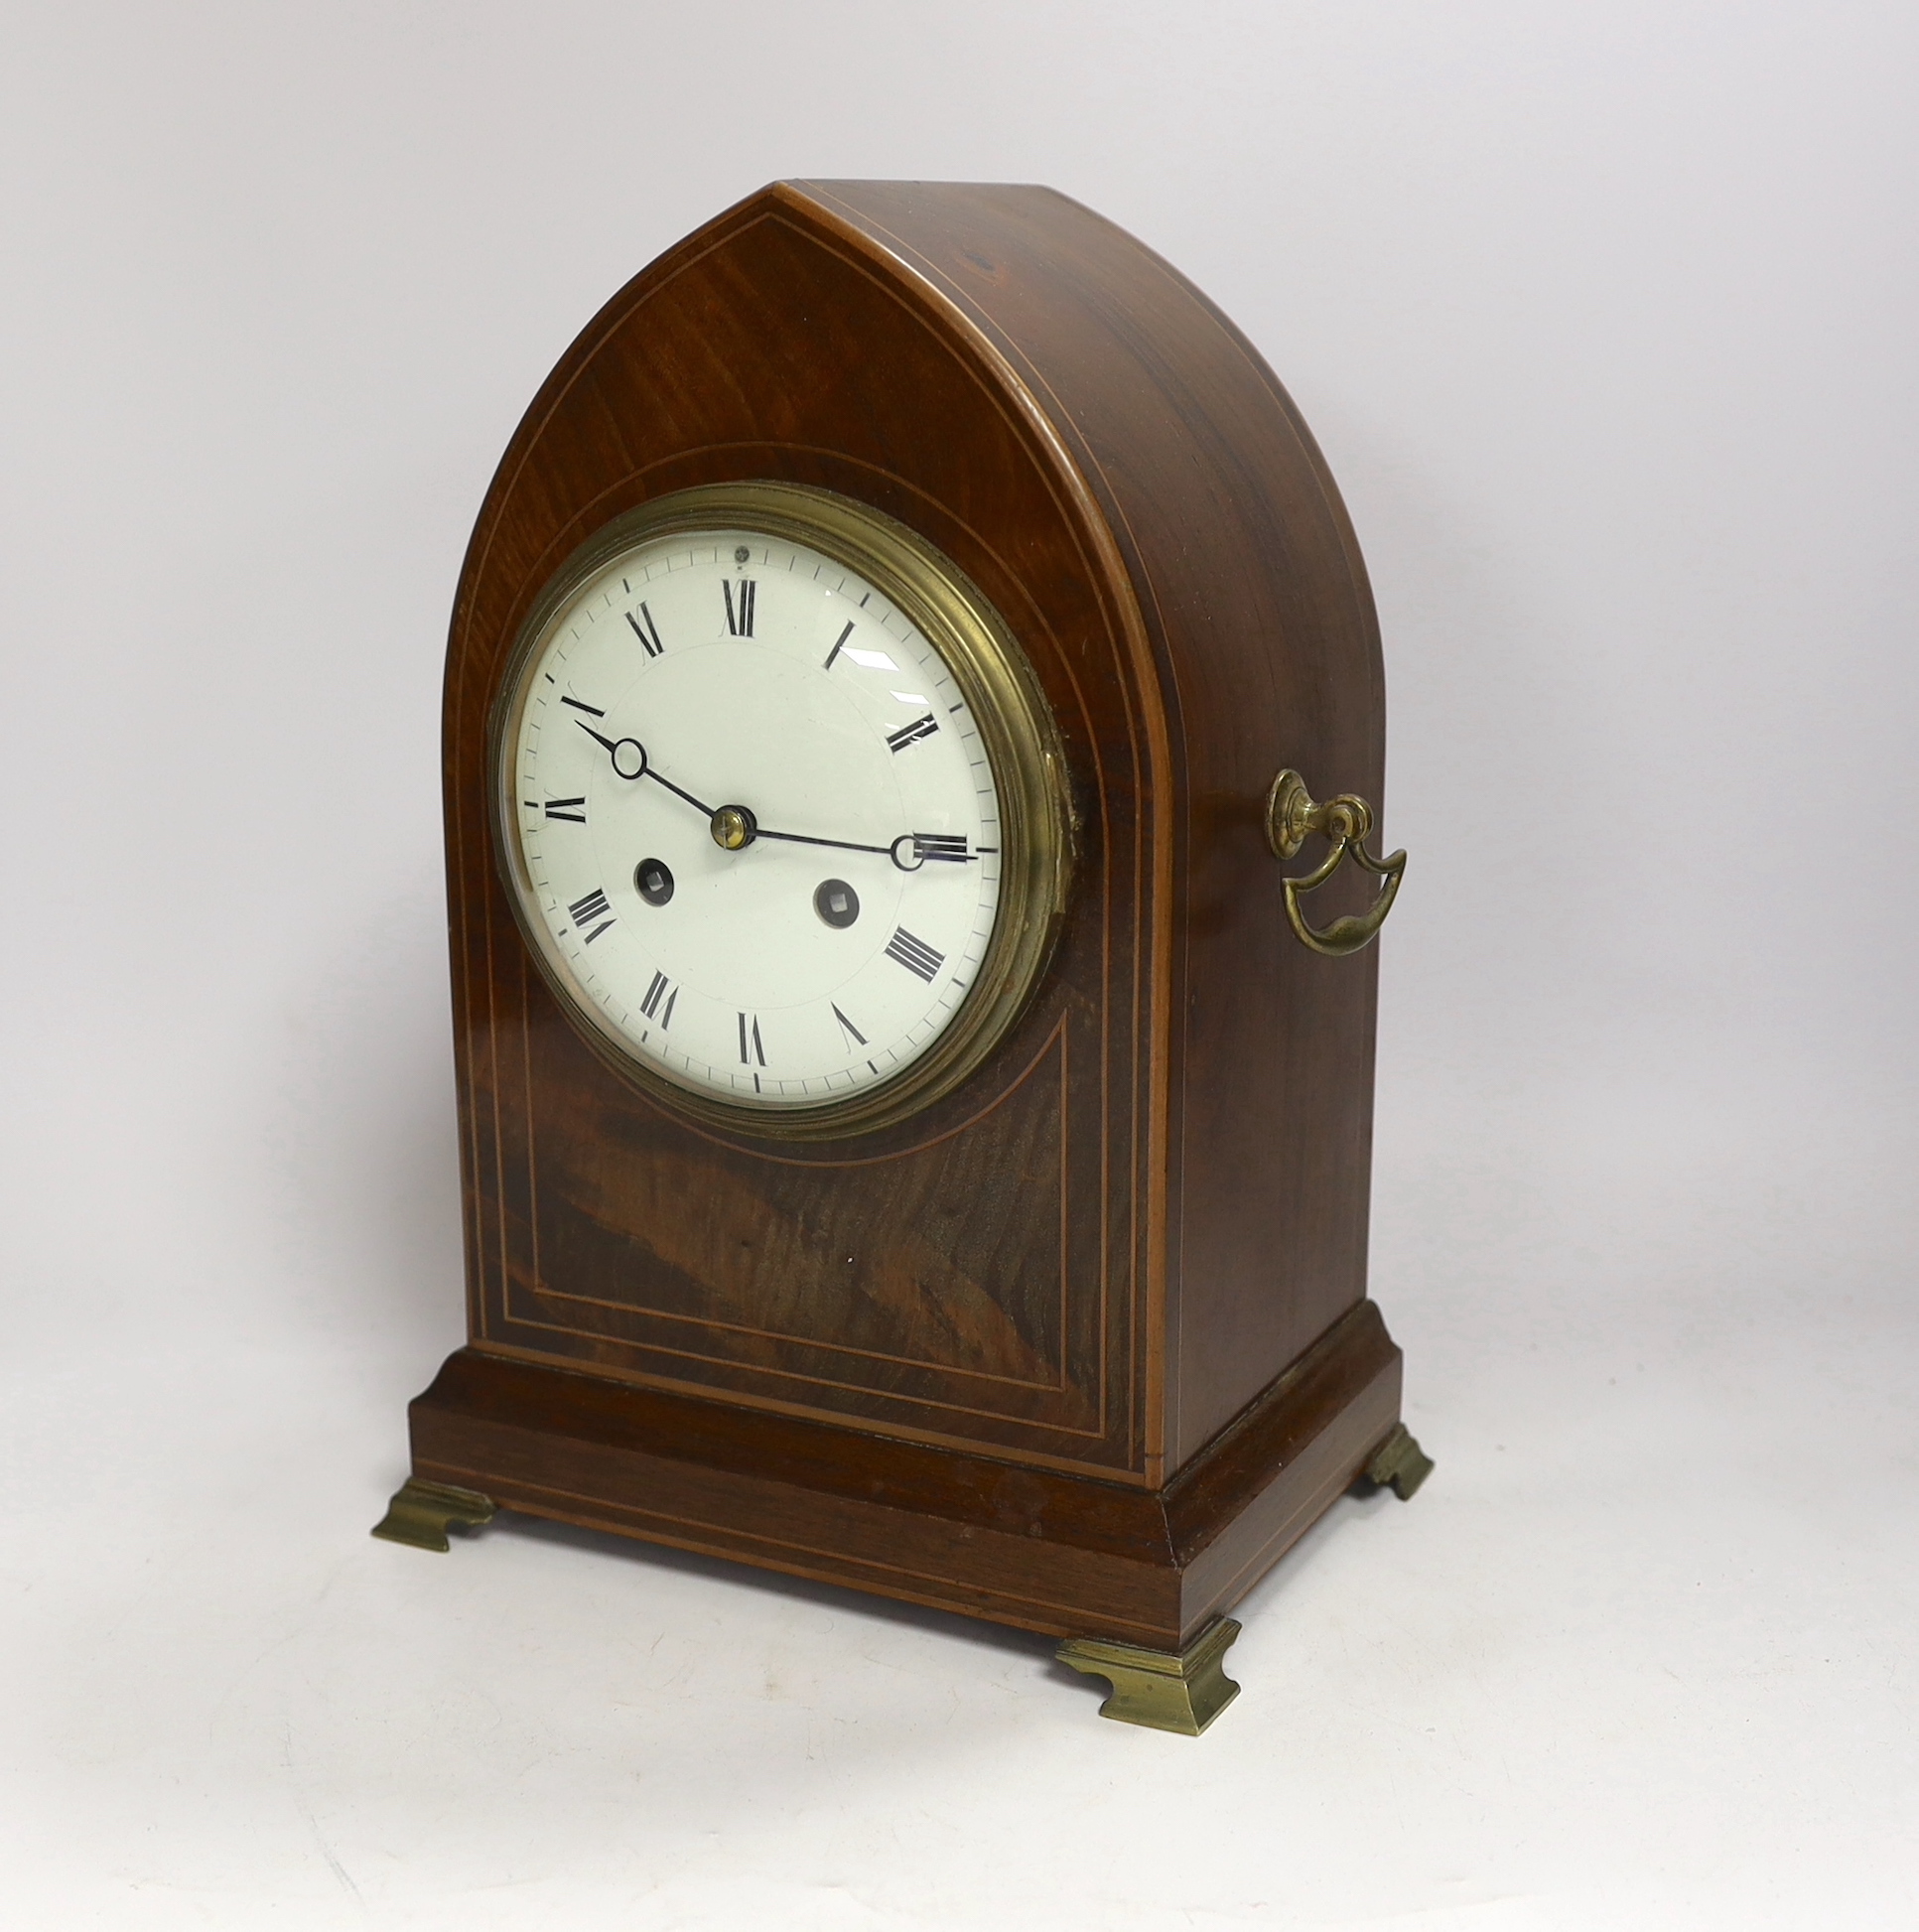 A late 19th century mahogany lancet shaped mantel clock, striking on a coiled gong, 29cm high